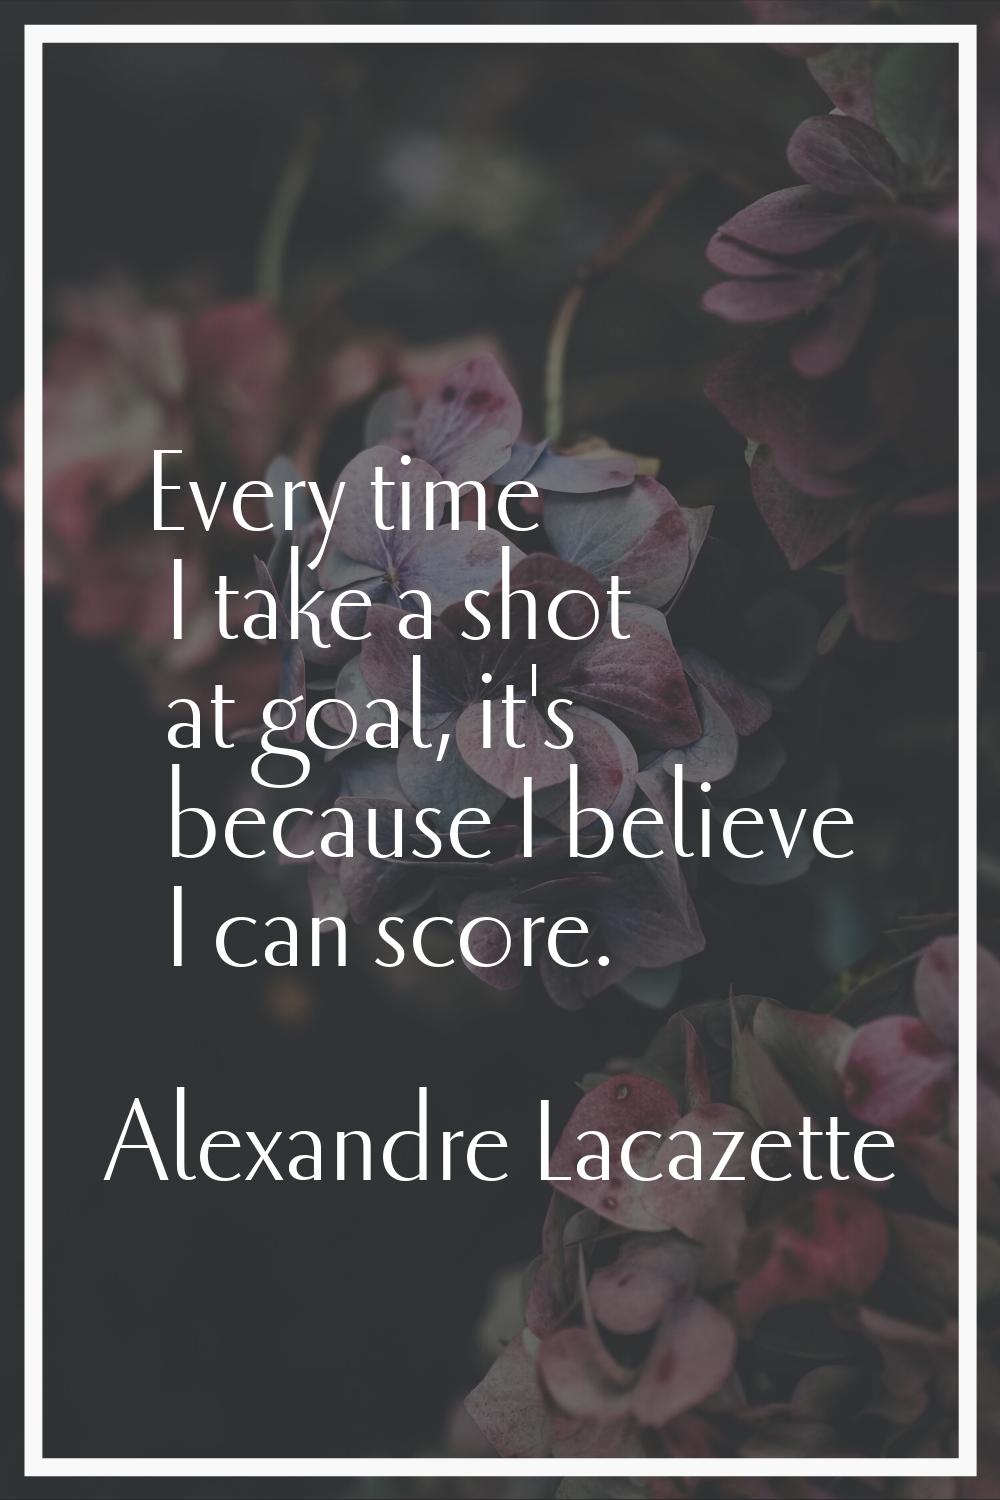 Every time I take a shot at goal, it's because I believe I can score.